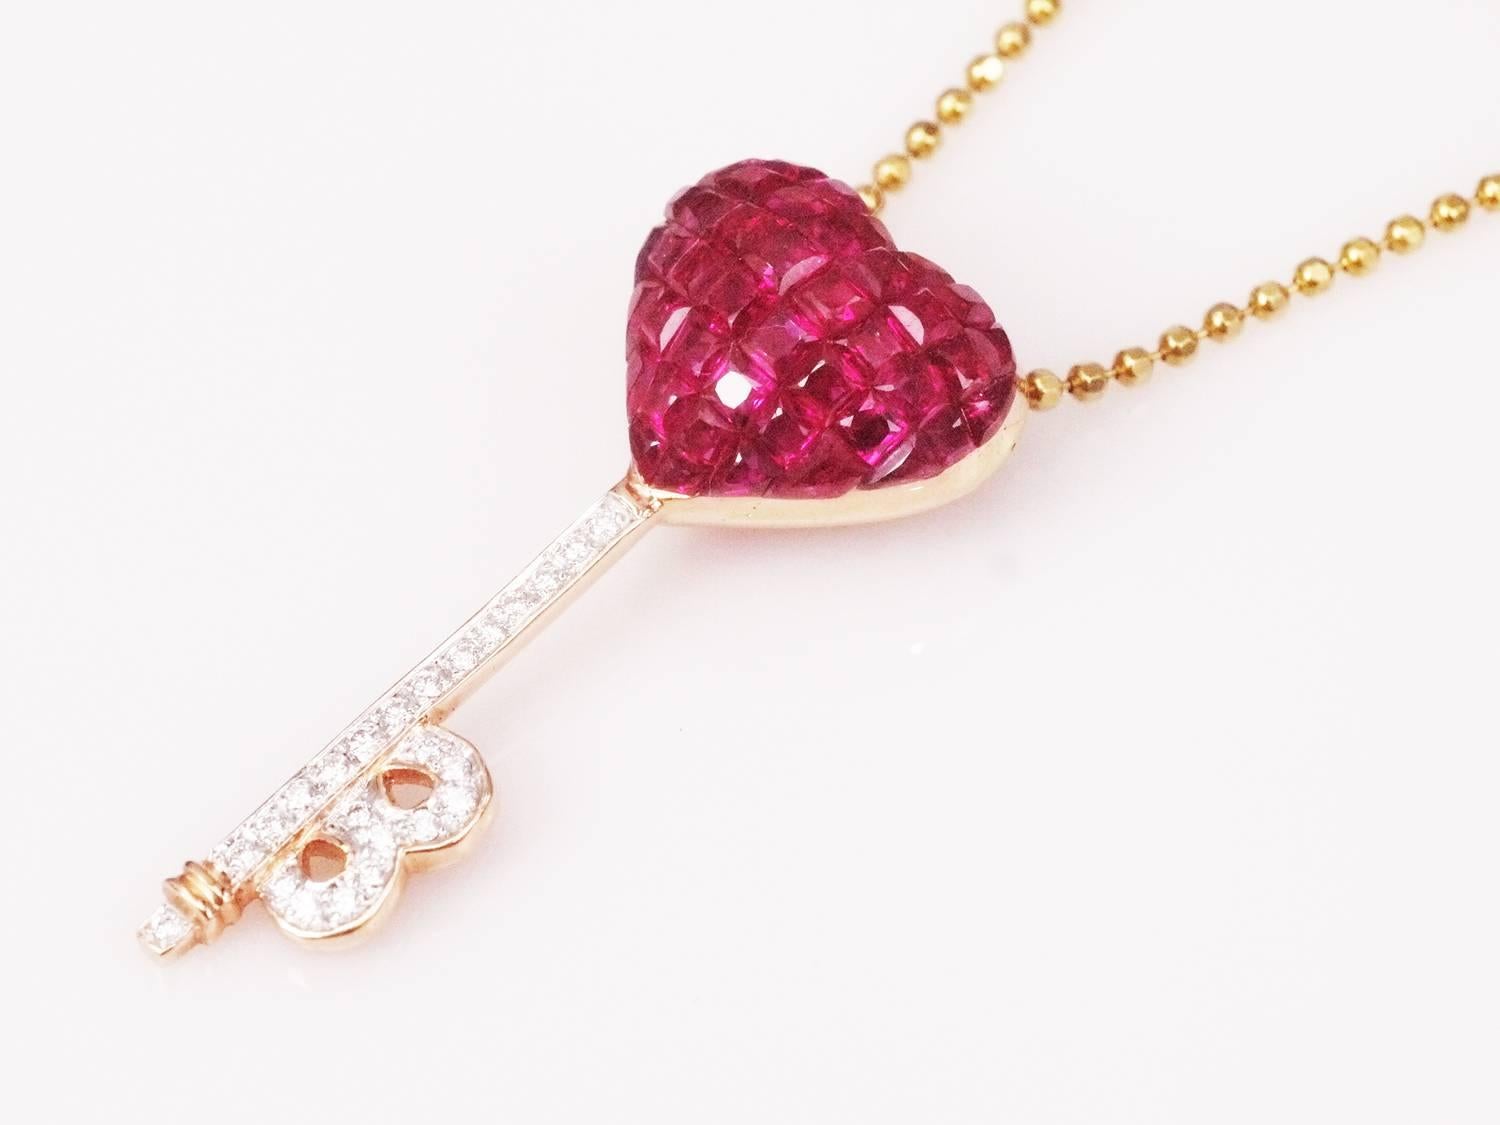 A dream of heart key for Valentine's day is a very nice looking.The invisible ruby heart shape of pendant made in 18k Rose gold.We made in very neat detail and workmanship. Top quality of ruby that is deep red and sparking use 6.12 ct
Diamond H VS